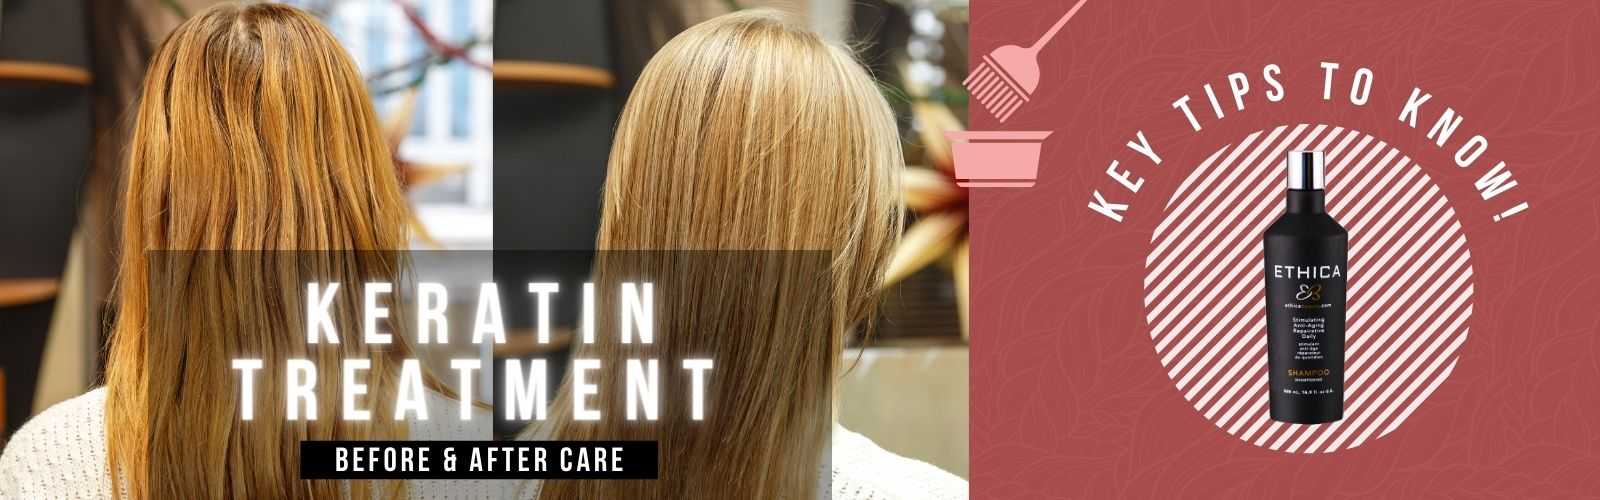 Keratin Treatments – Before & After Care